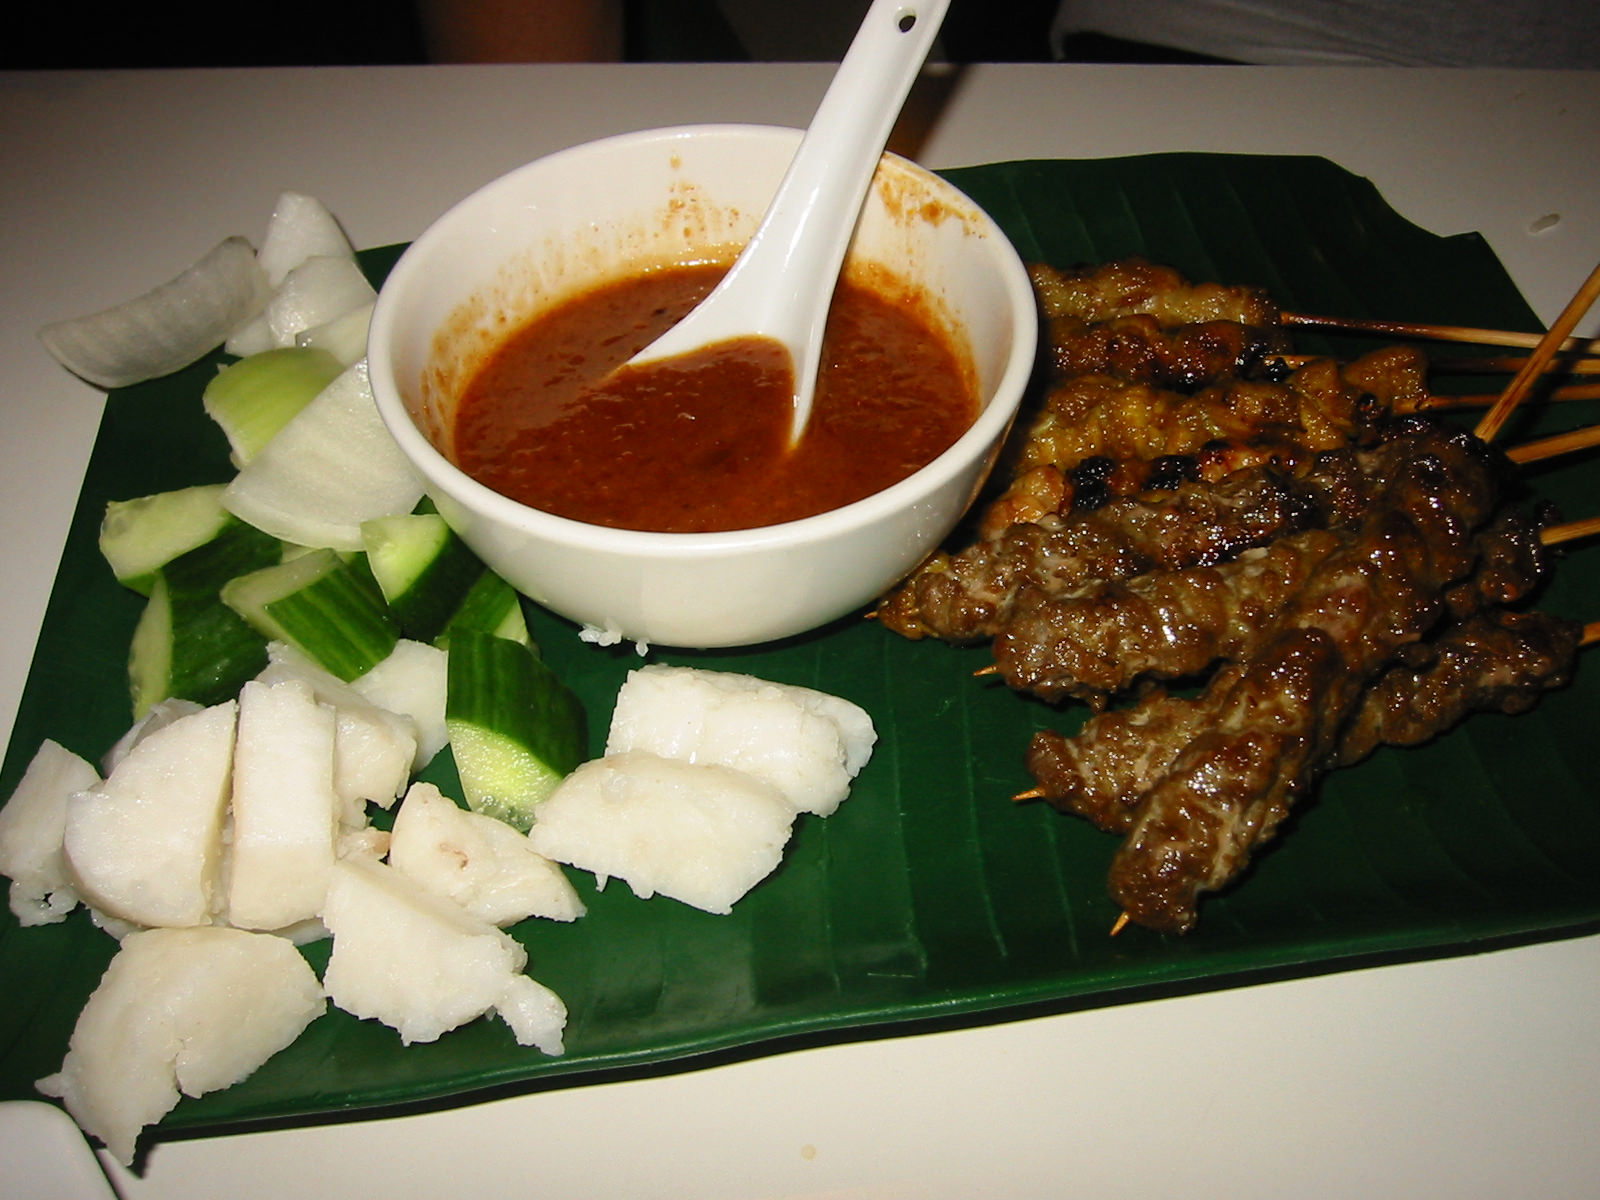 Chicken and beef satay